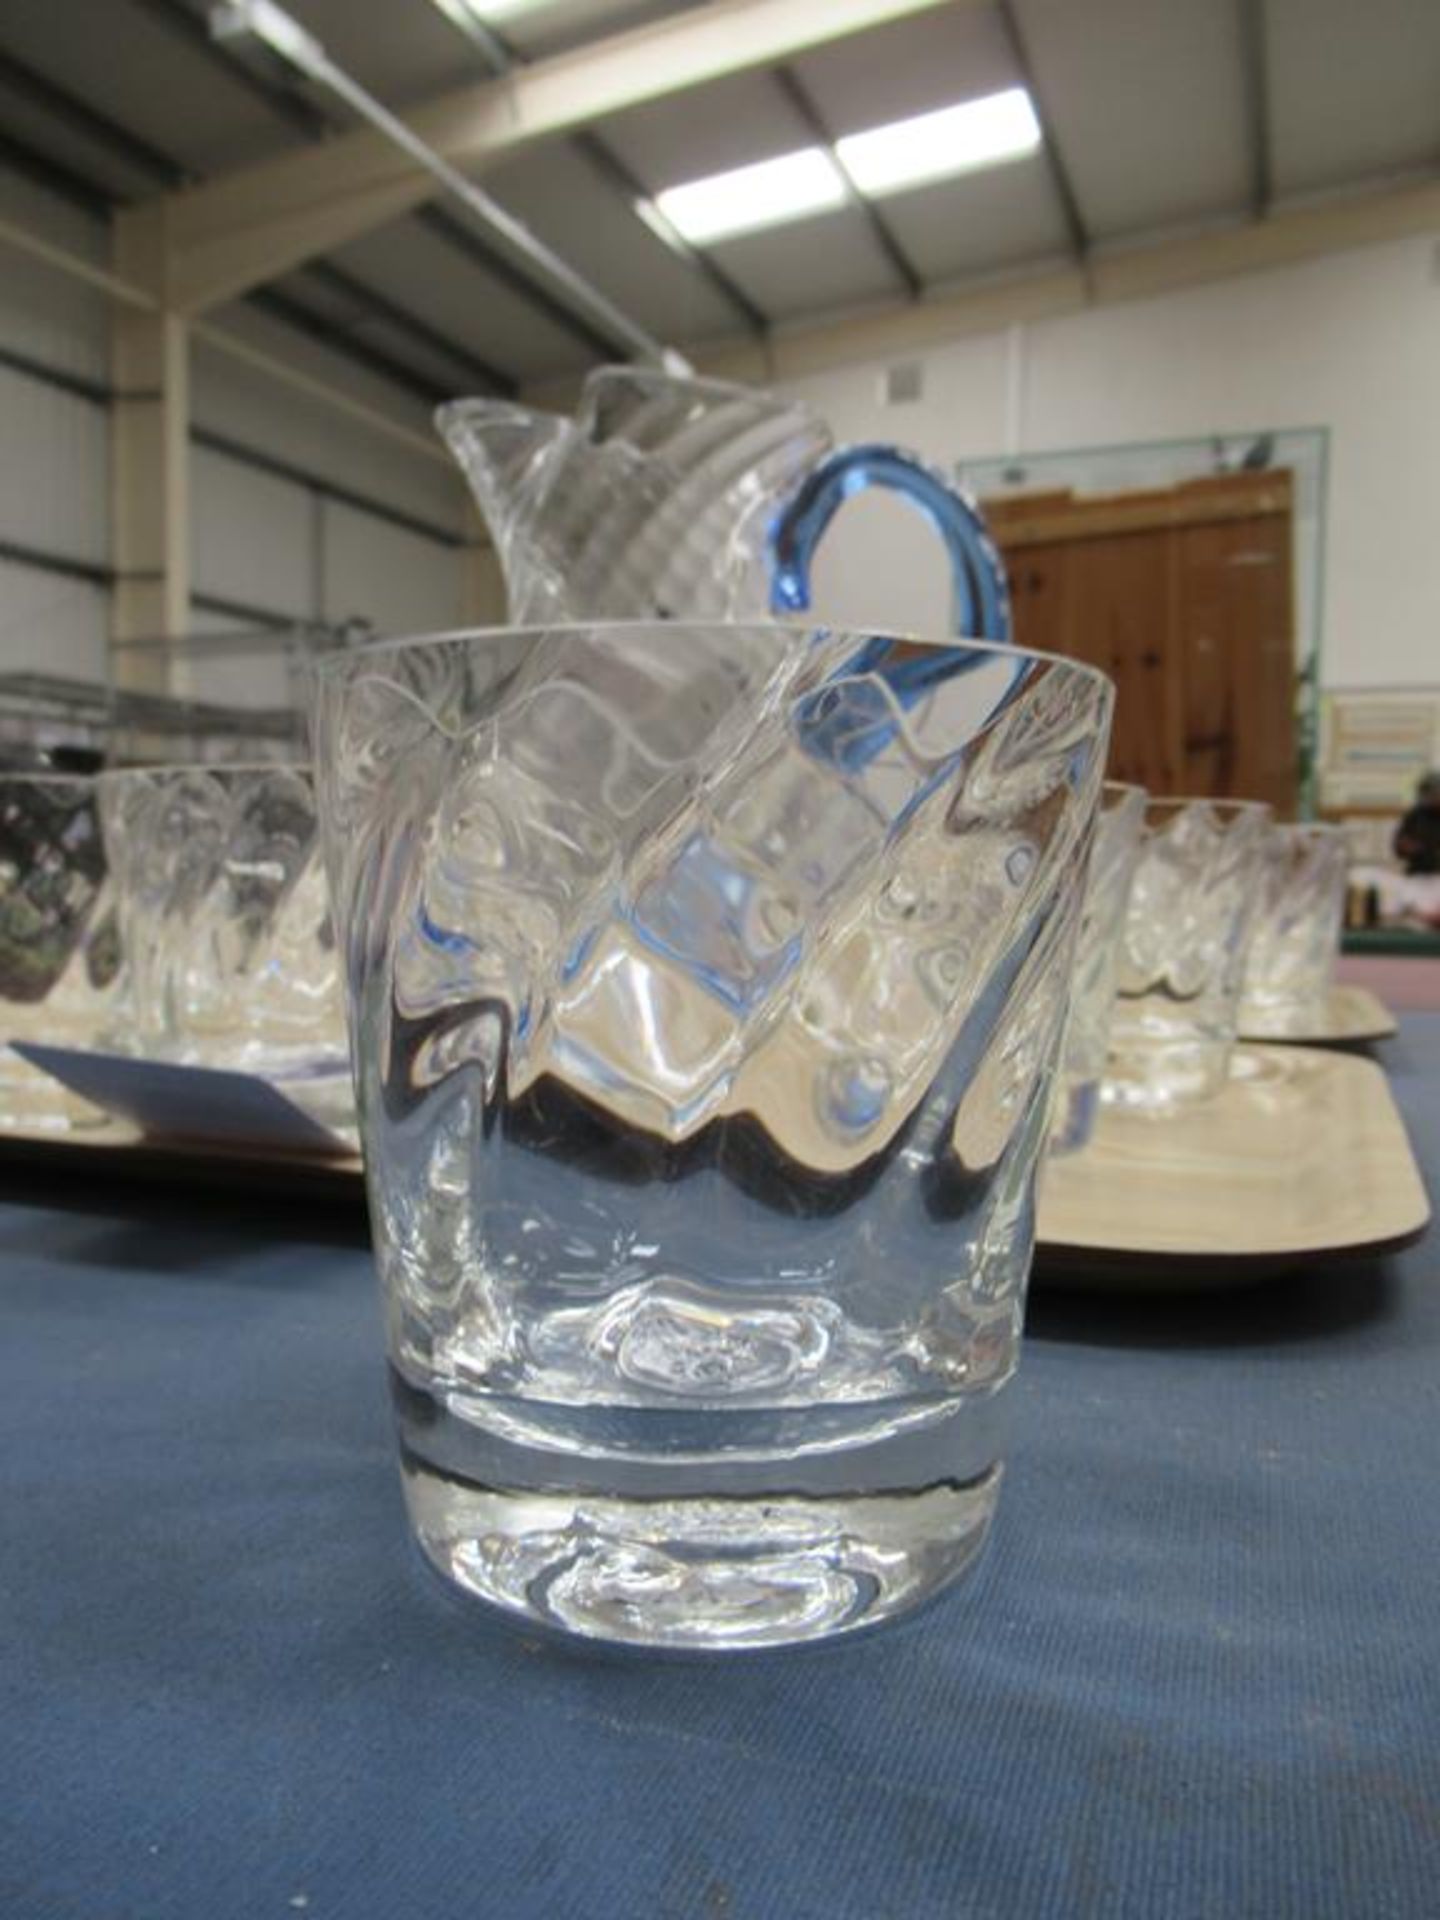 A Gibraltar Glass Jug with Twenty Drinking Glasses - Image 4 of 4